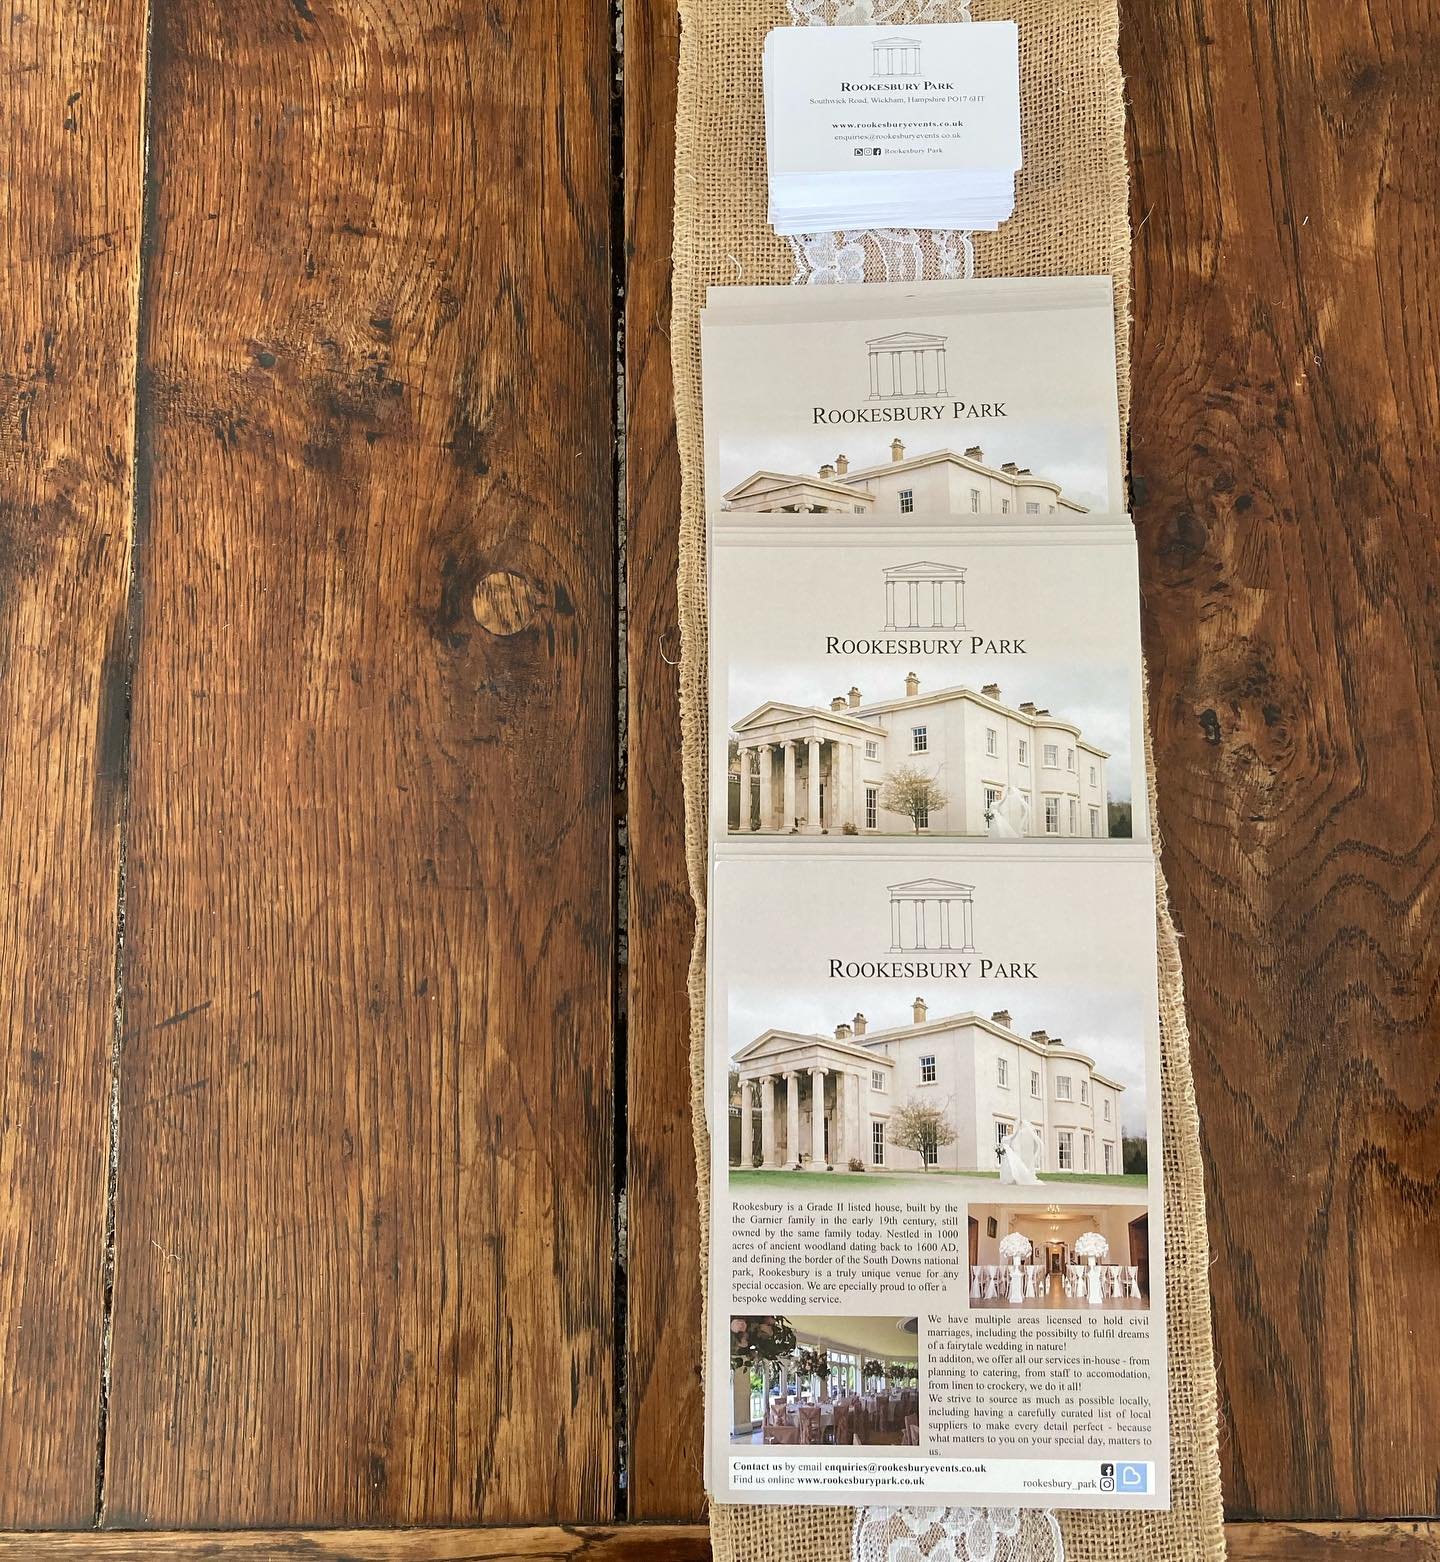 Our new business cards and flyers arrived today!

In time for THIS Sunday&rsquo;s wedding fayre 11am - 3pm [FREE TICKET LINK IN BIO] 

Don&rsquo;t forget to find our tea room for a hot drink and a cake or sausage roll!